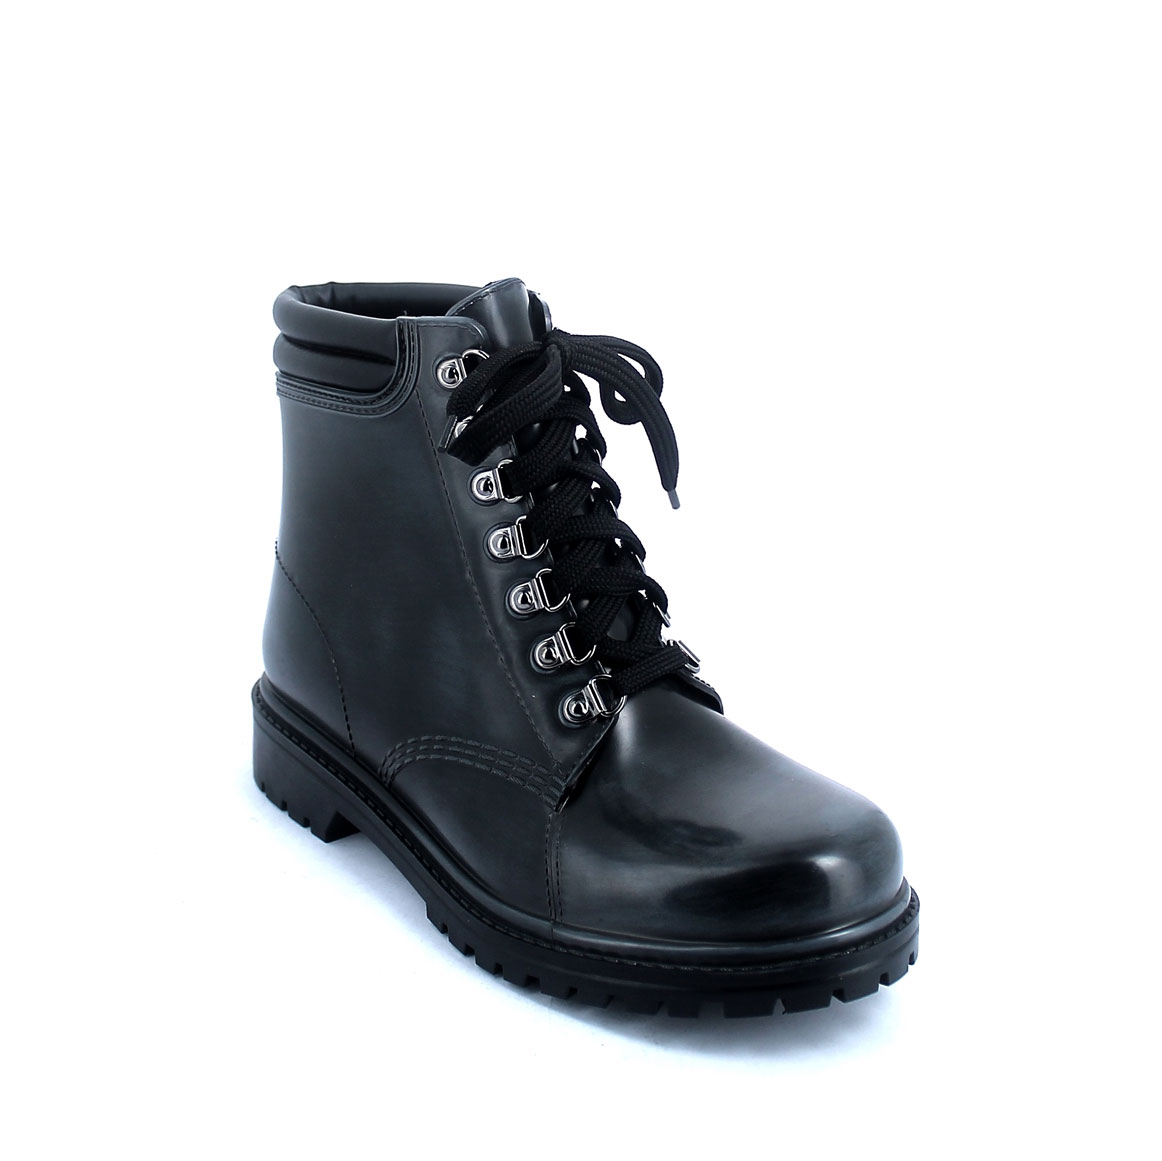 Short laced up walking boot in Black pvc with leatherette padded trim